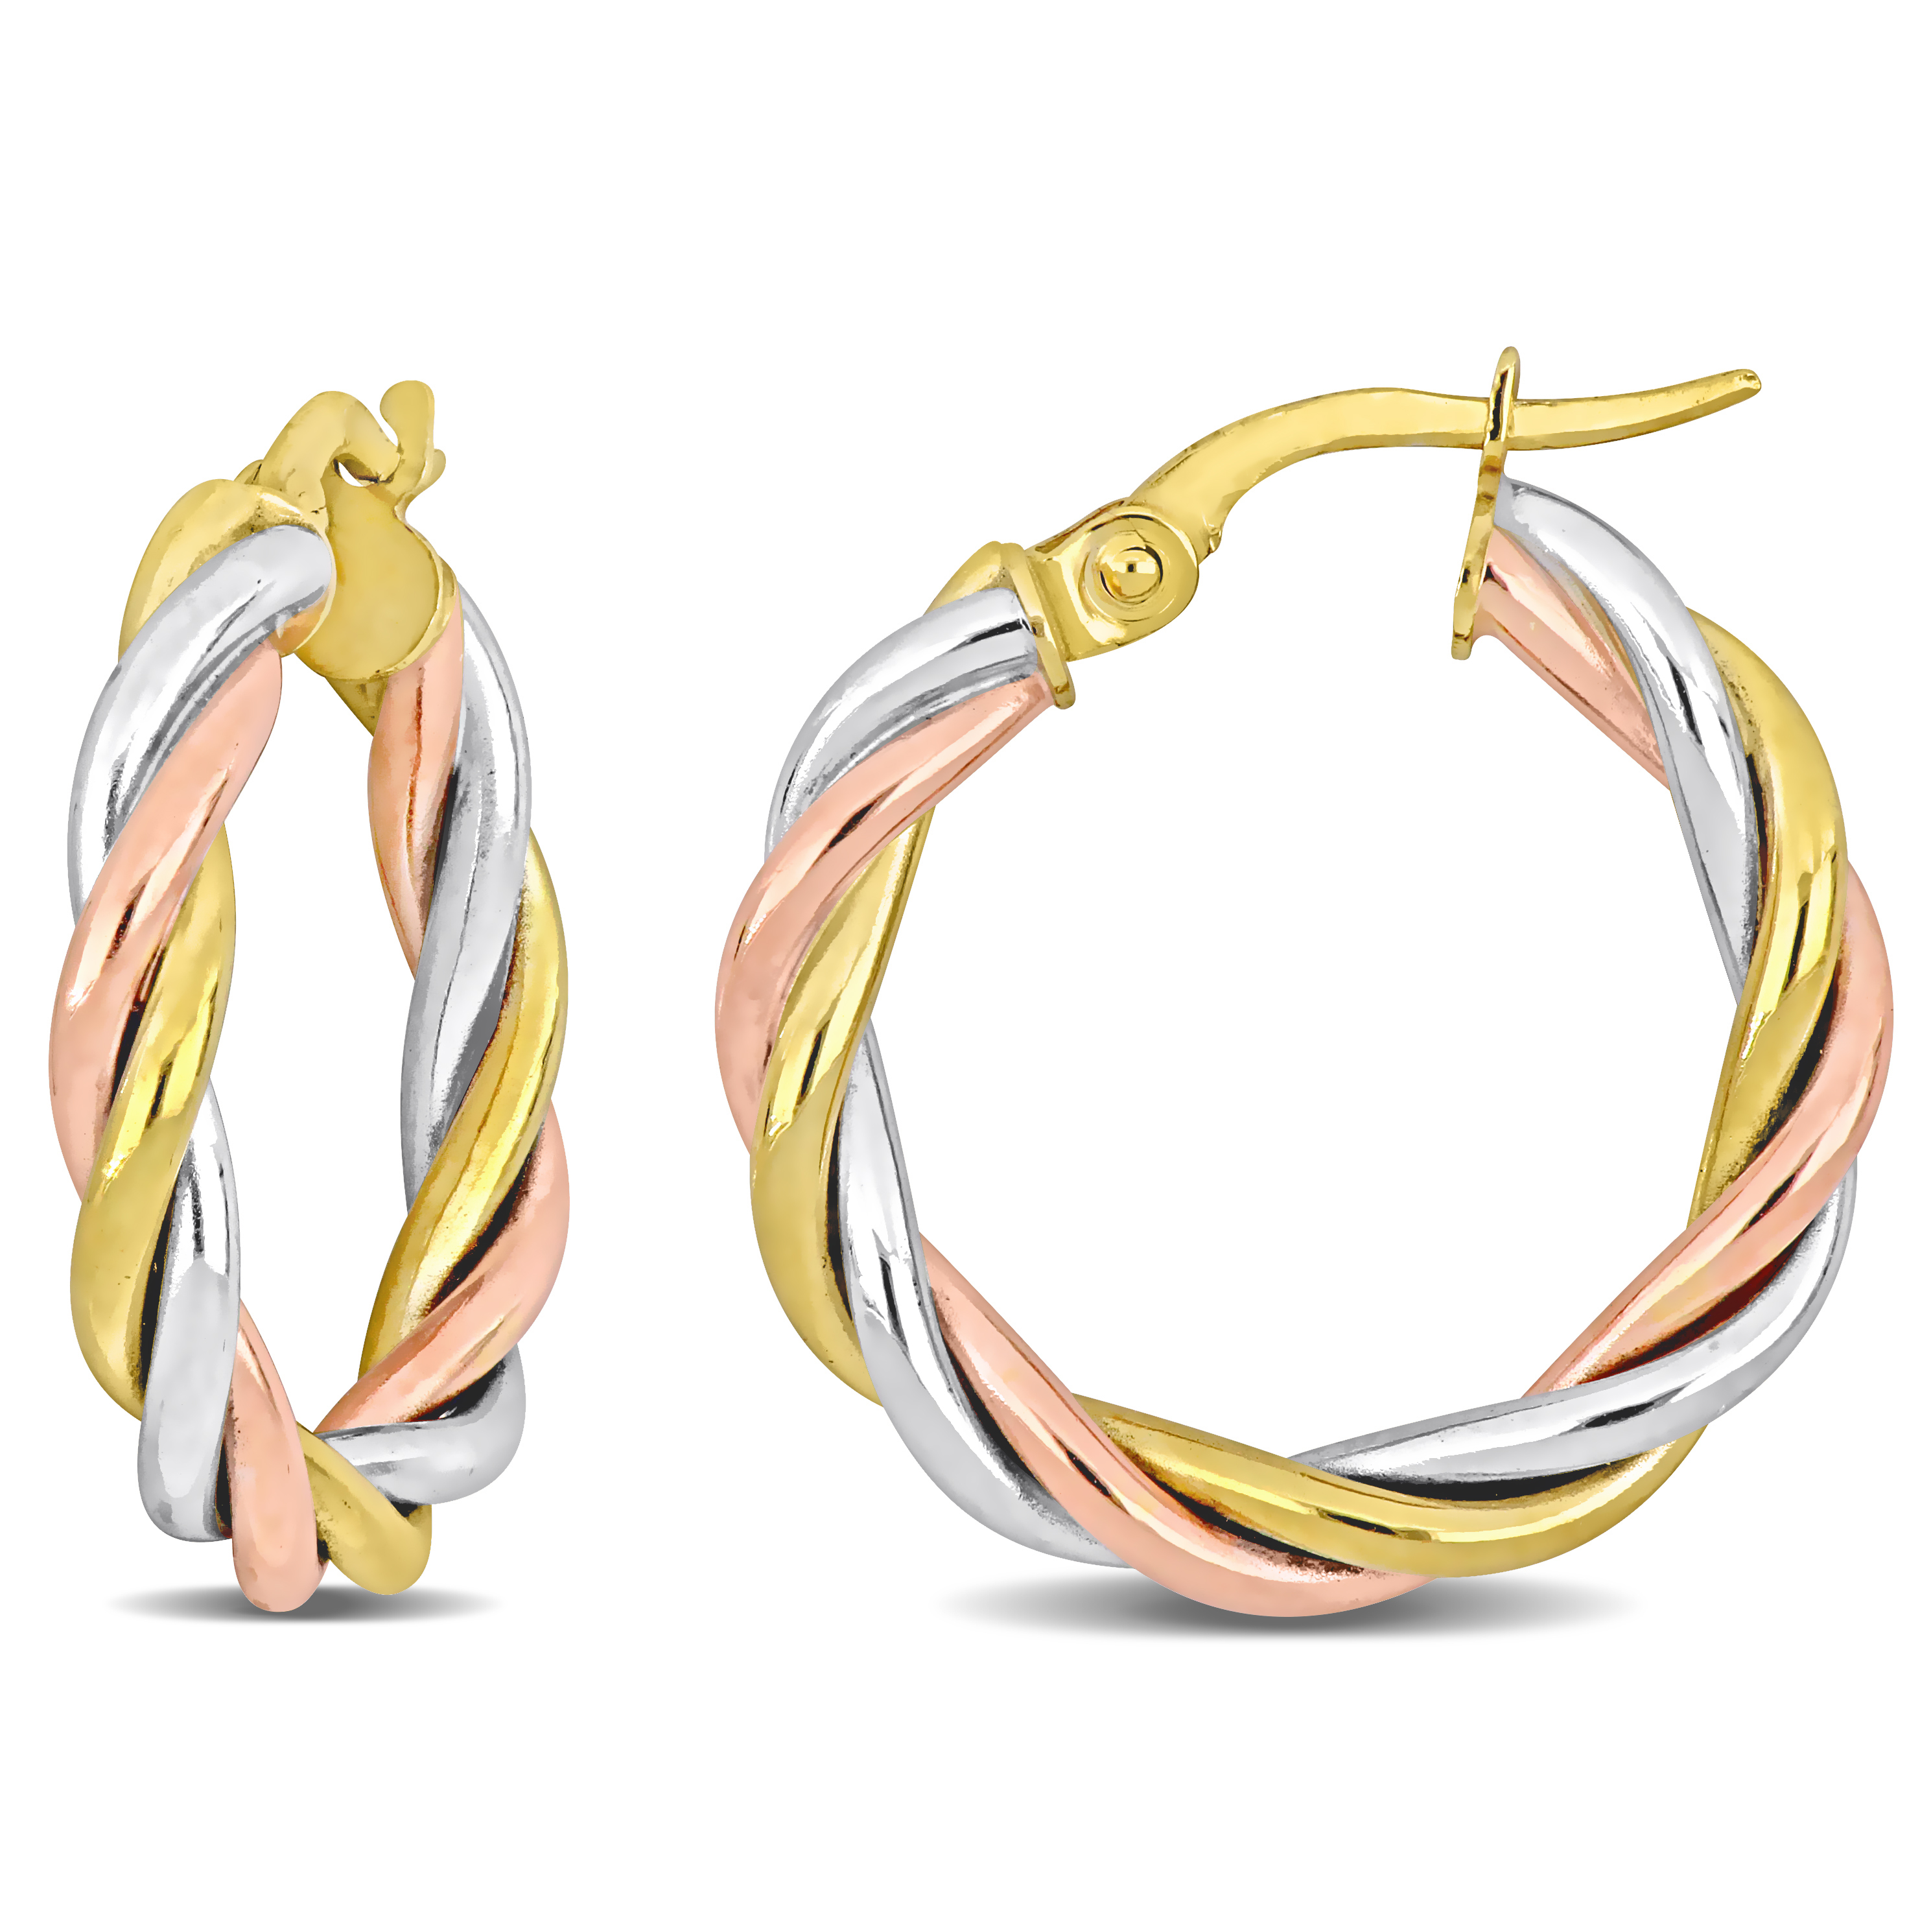 15.5 MM Twisted Hoop Earrings in 3-Tone 10k Yellow, Rose and White Gold